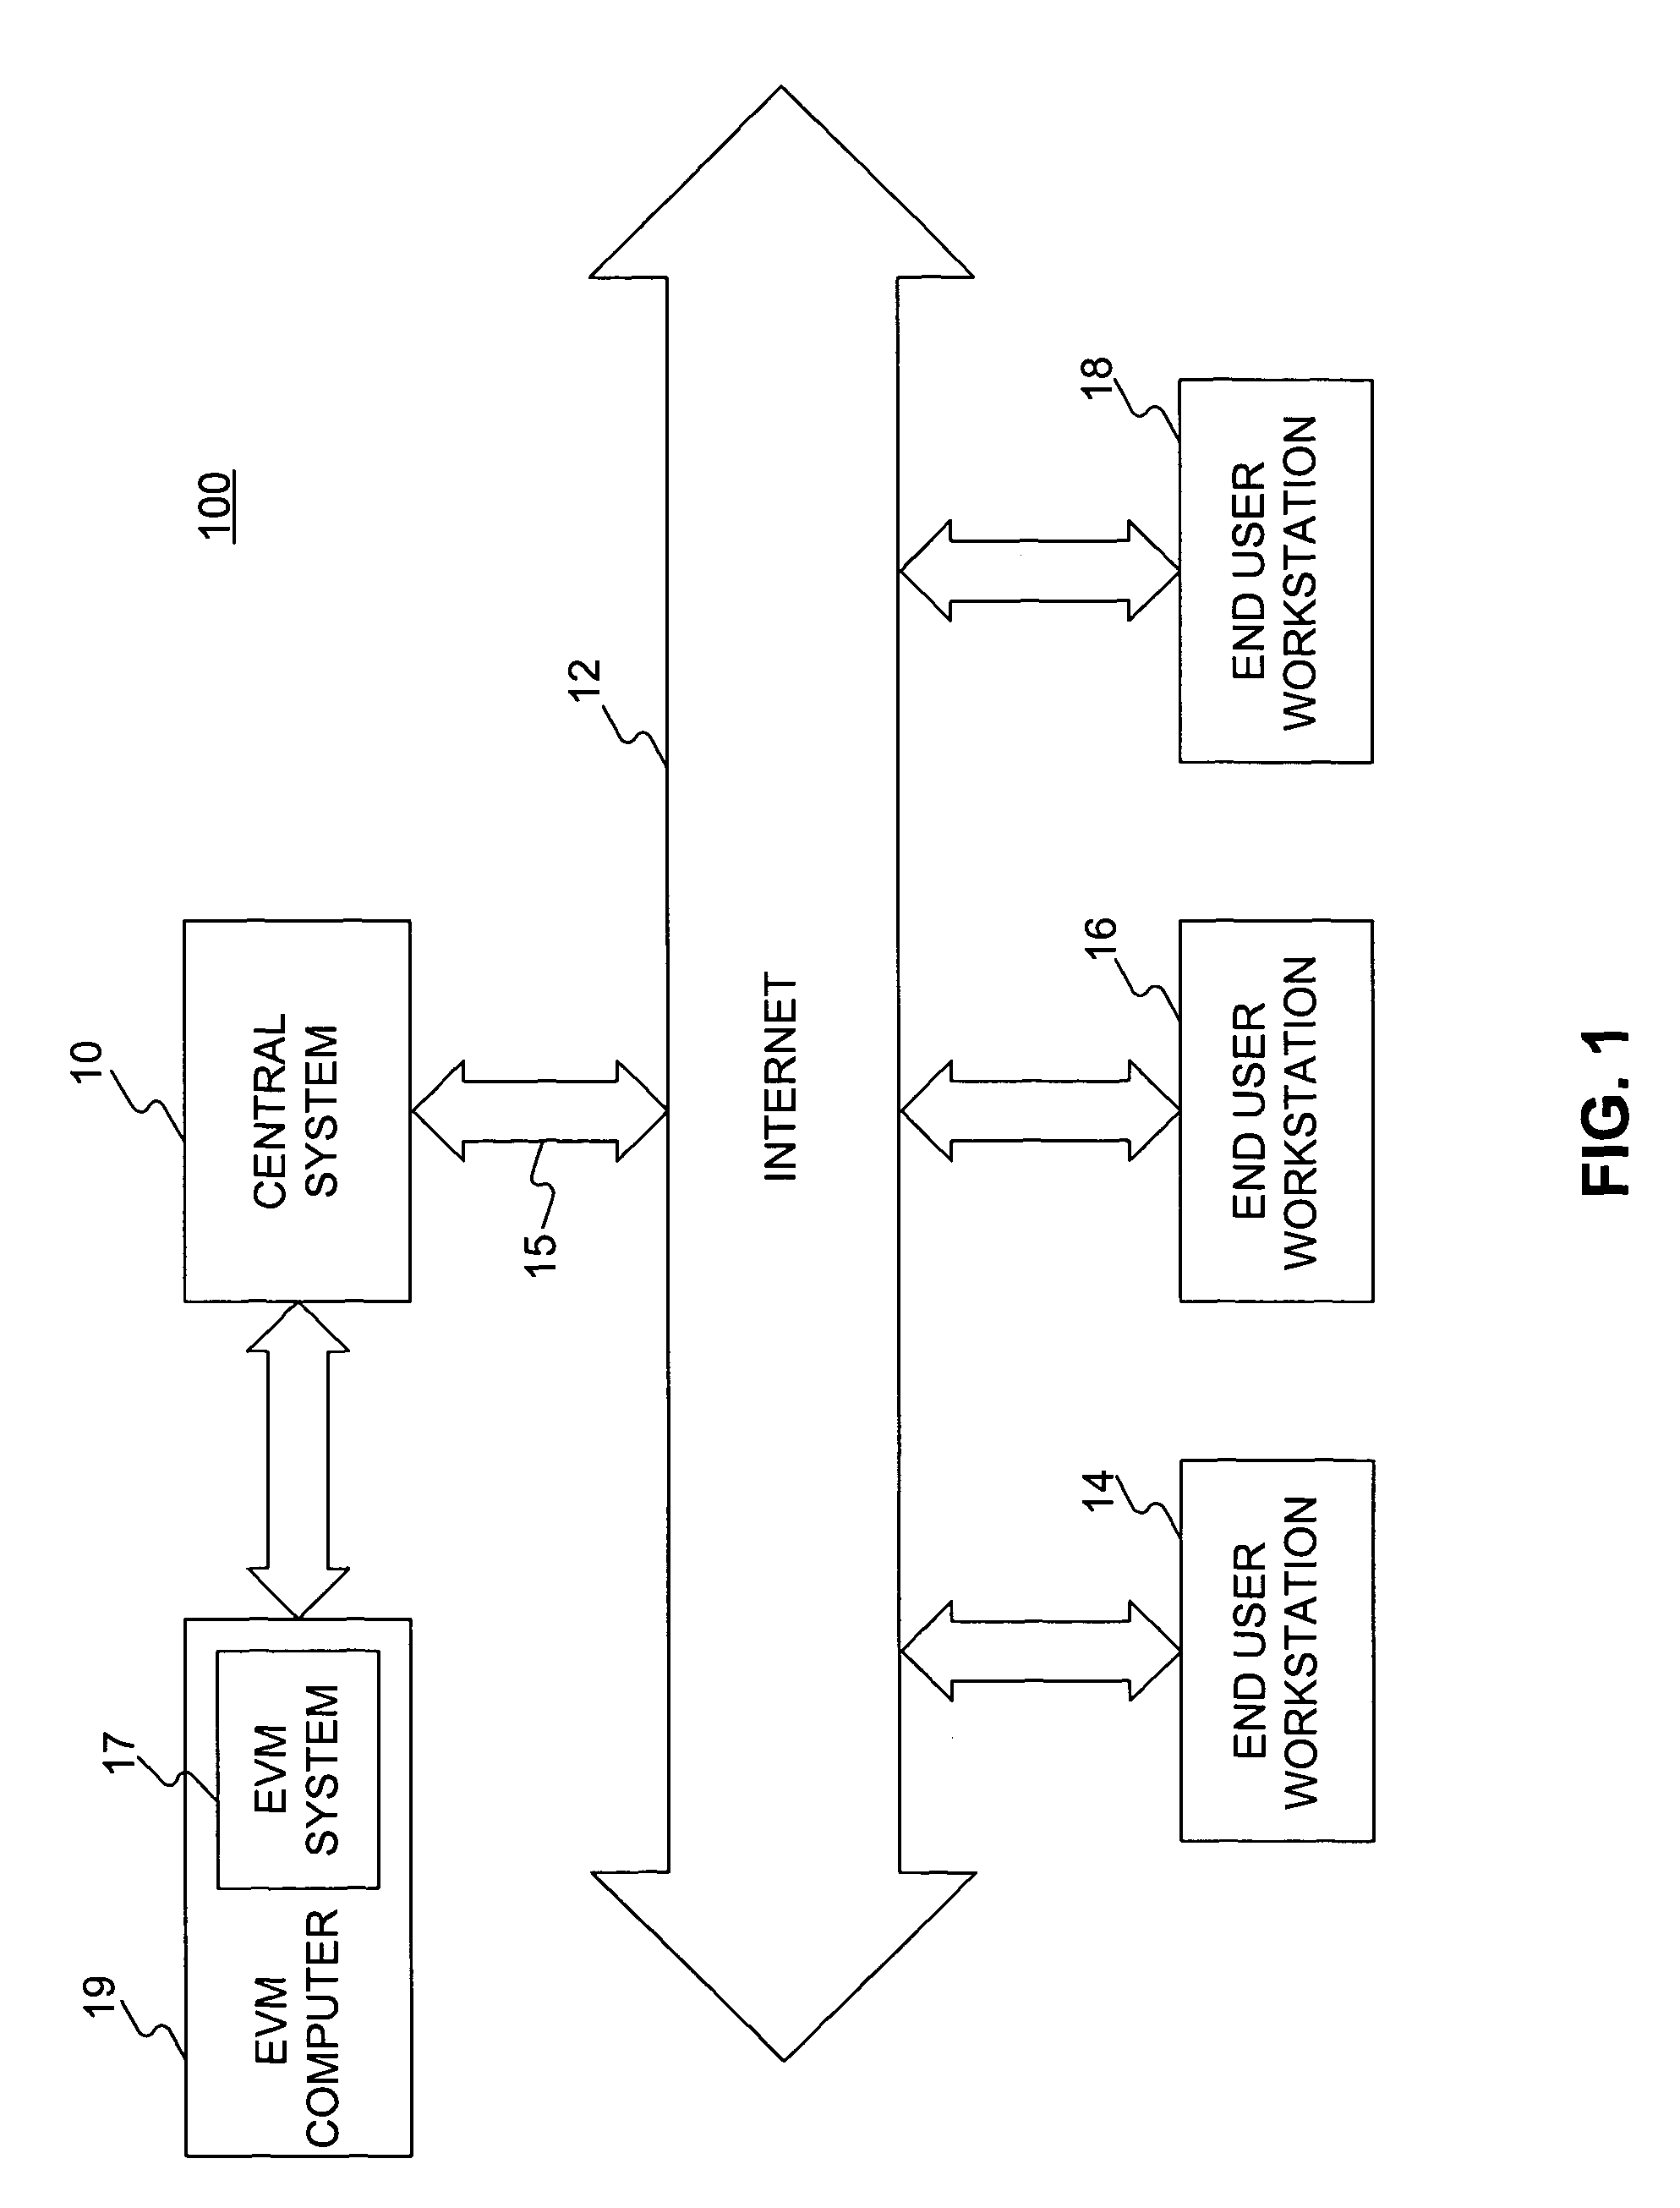 Methods and systems for testing evaluation modules